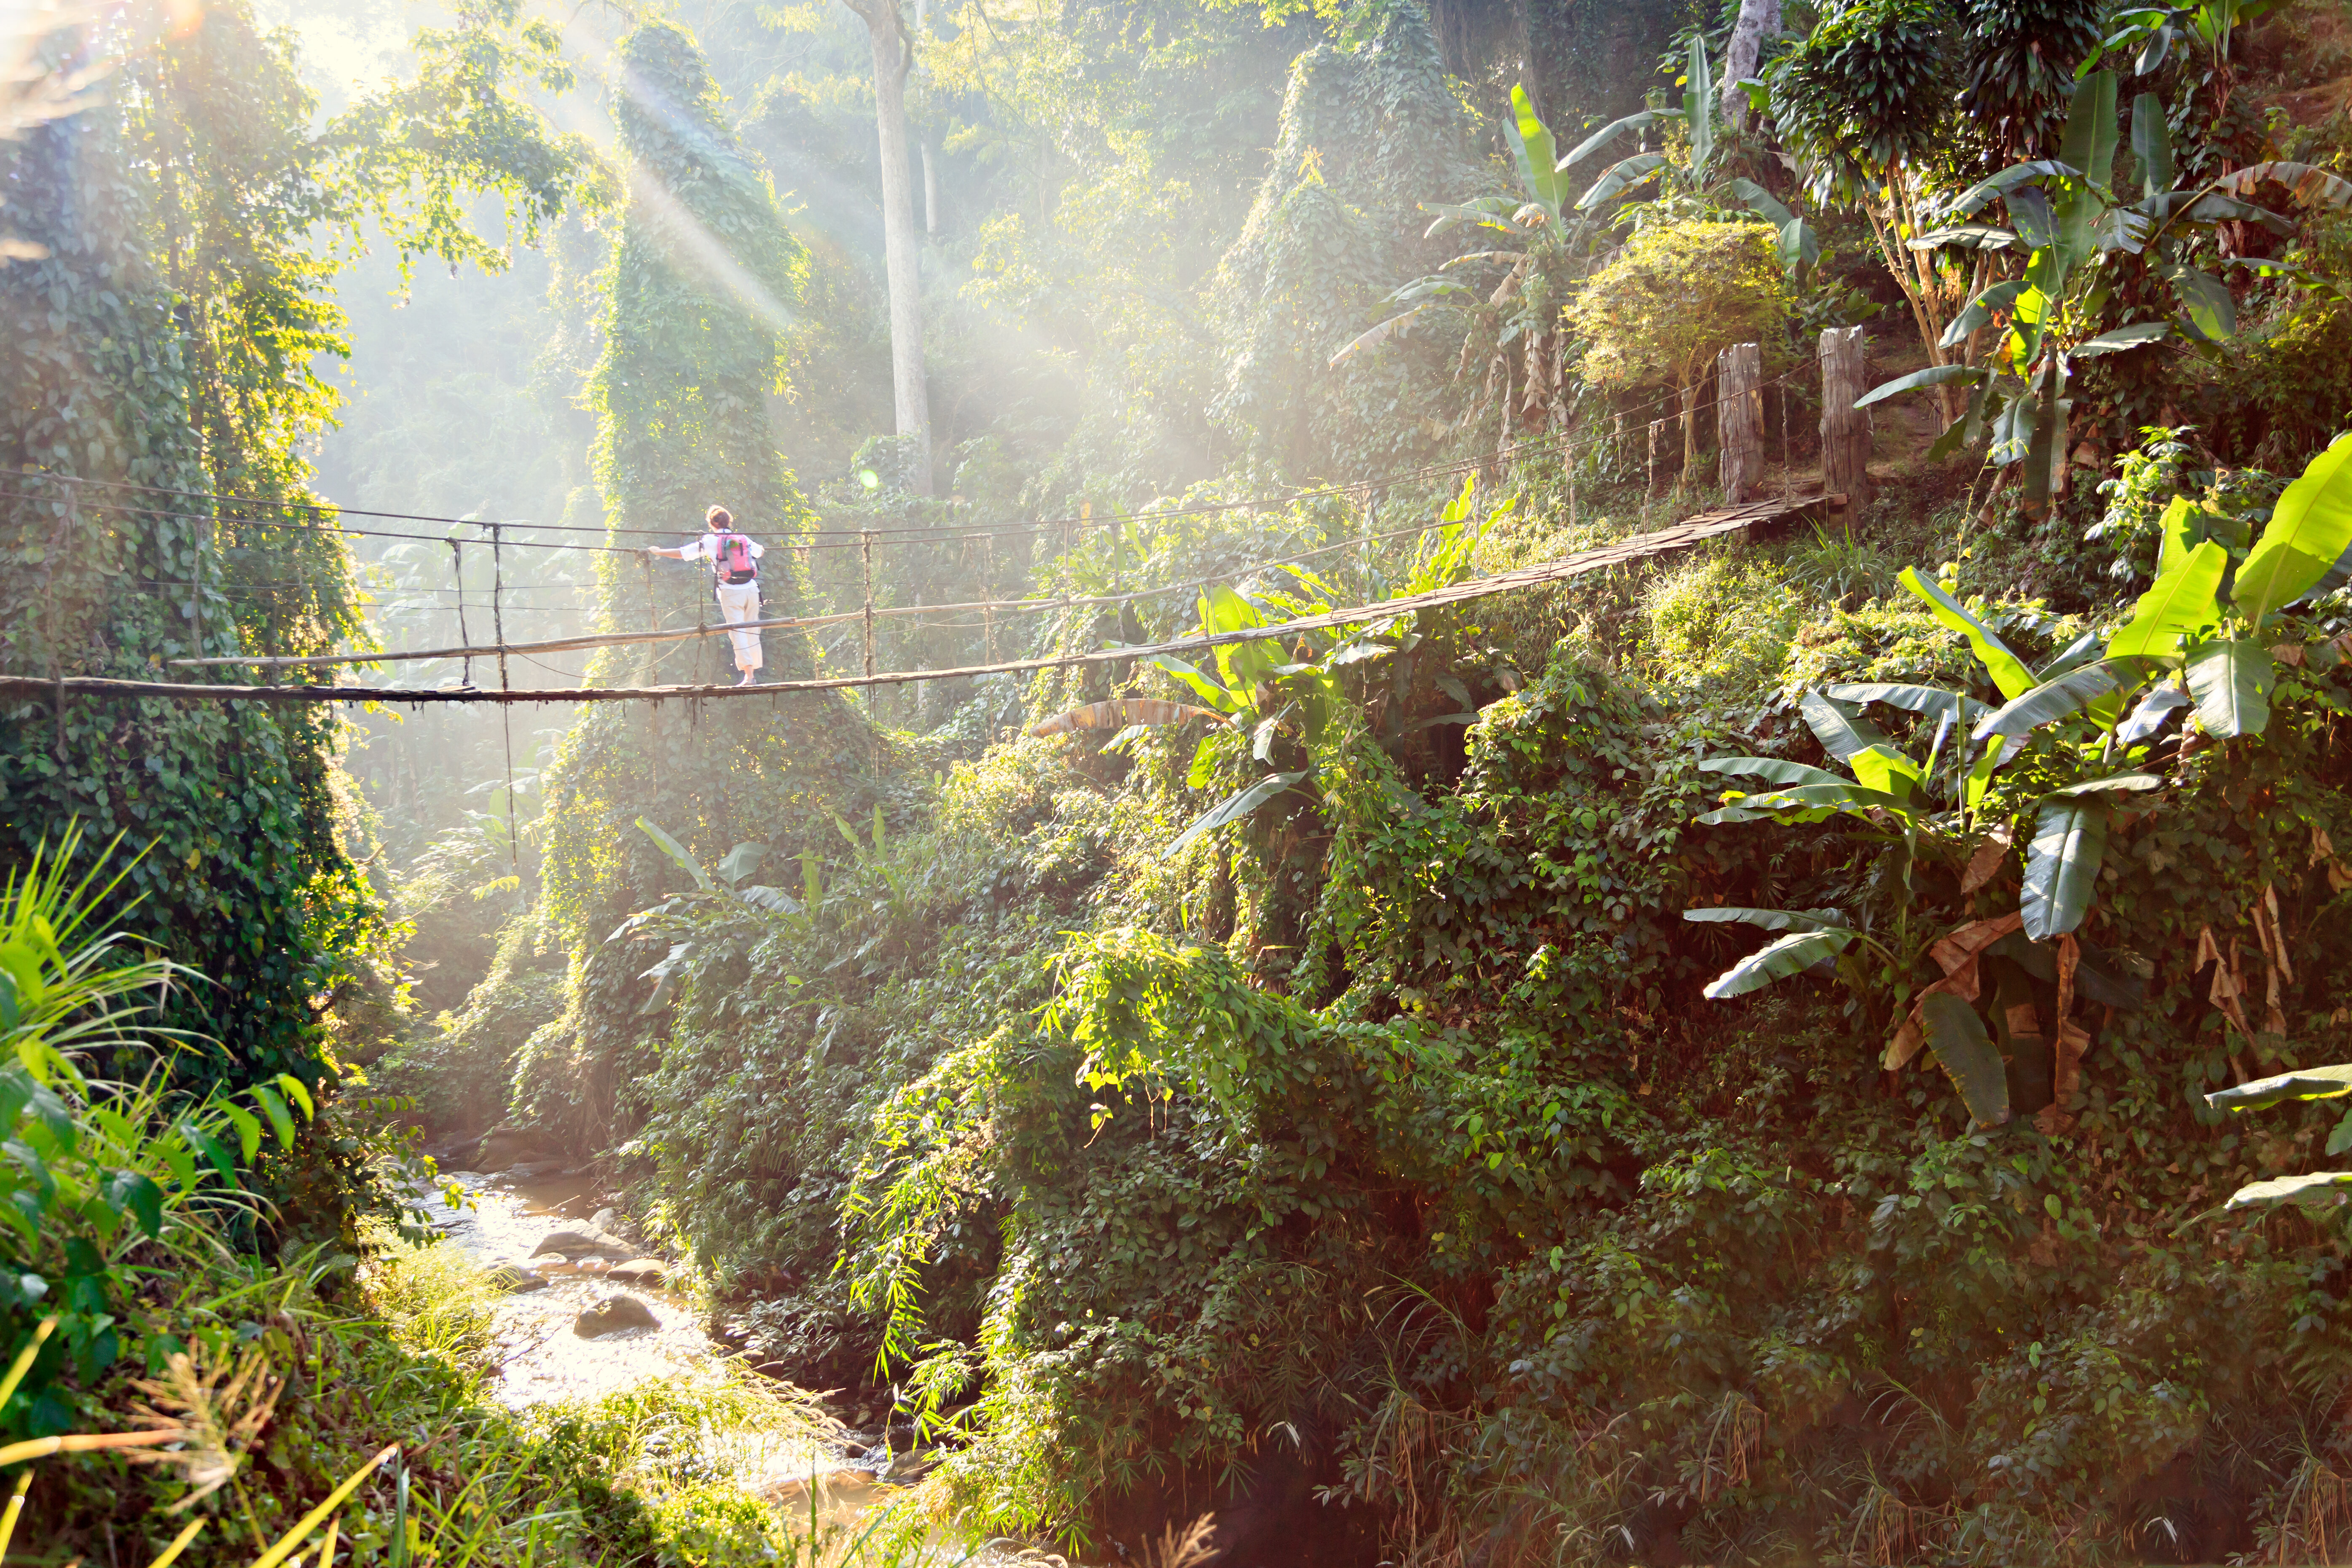 Woman with backpack on suspension bridge in rainforest 509184494%205580x3720